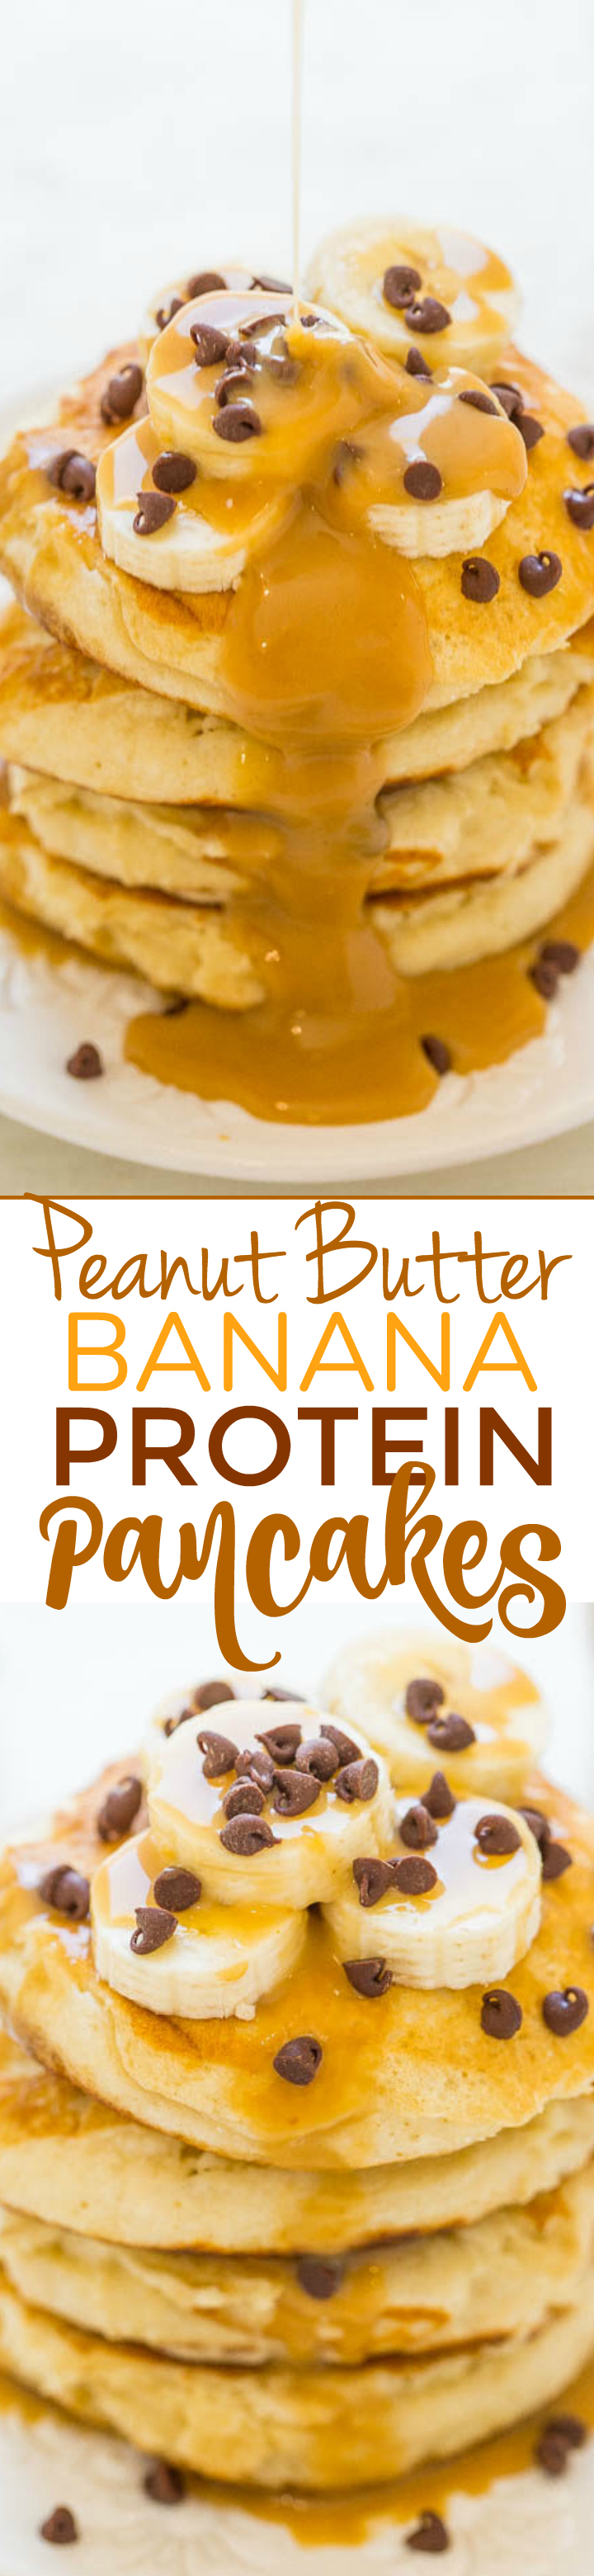 Peanut Butter Banana Protein Pancakes - Light, fluffy, EASY pancakes that pack 13+ grams of PROTEIN per serving!! The peanut butter-maple syrup is rich, decadent, and you'll never settle for plain maple syrup again!!